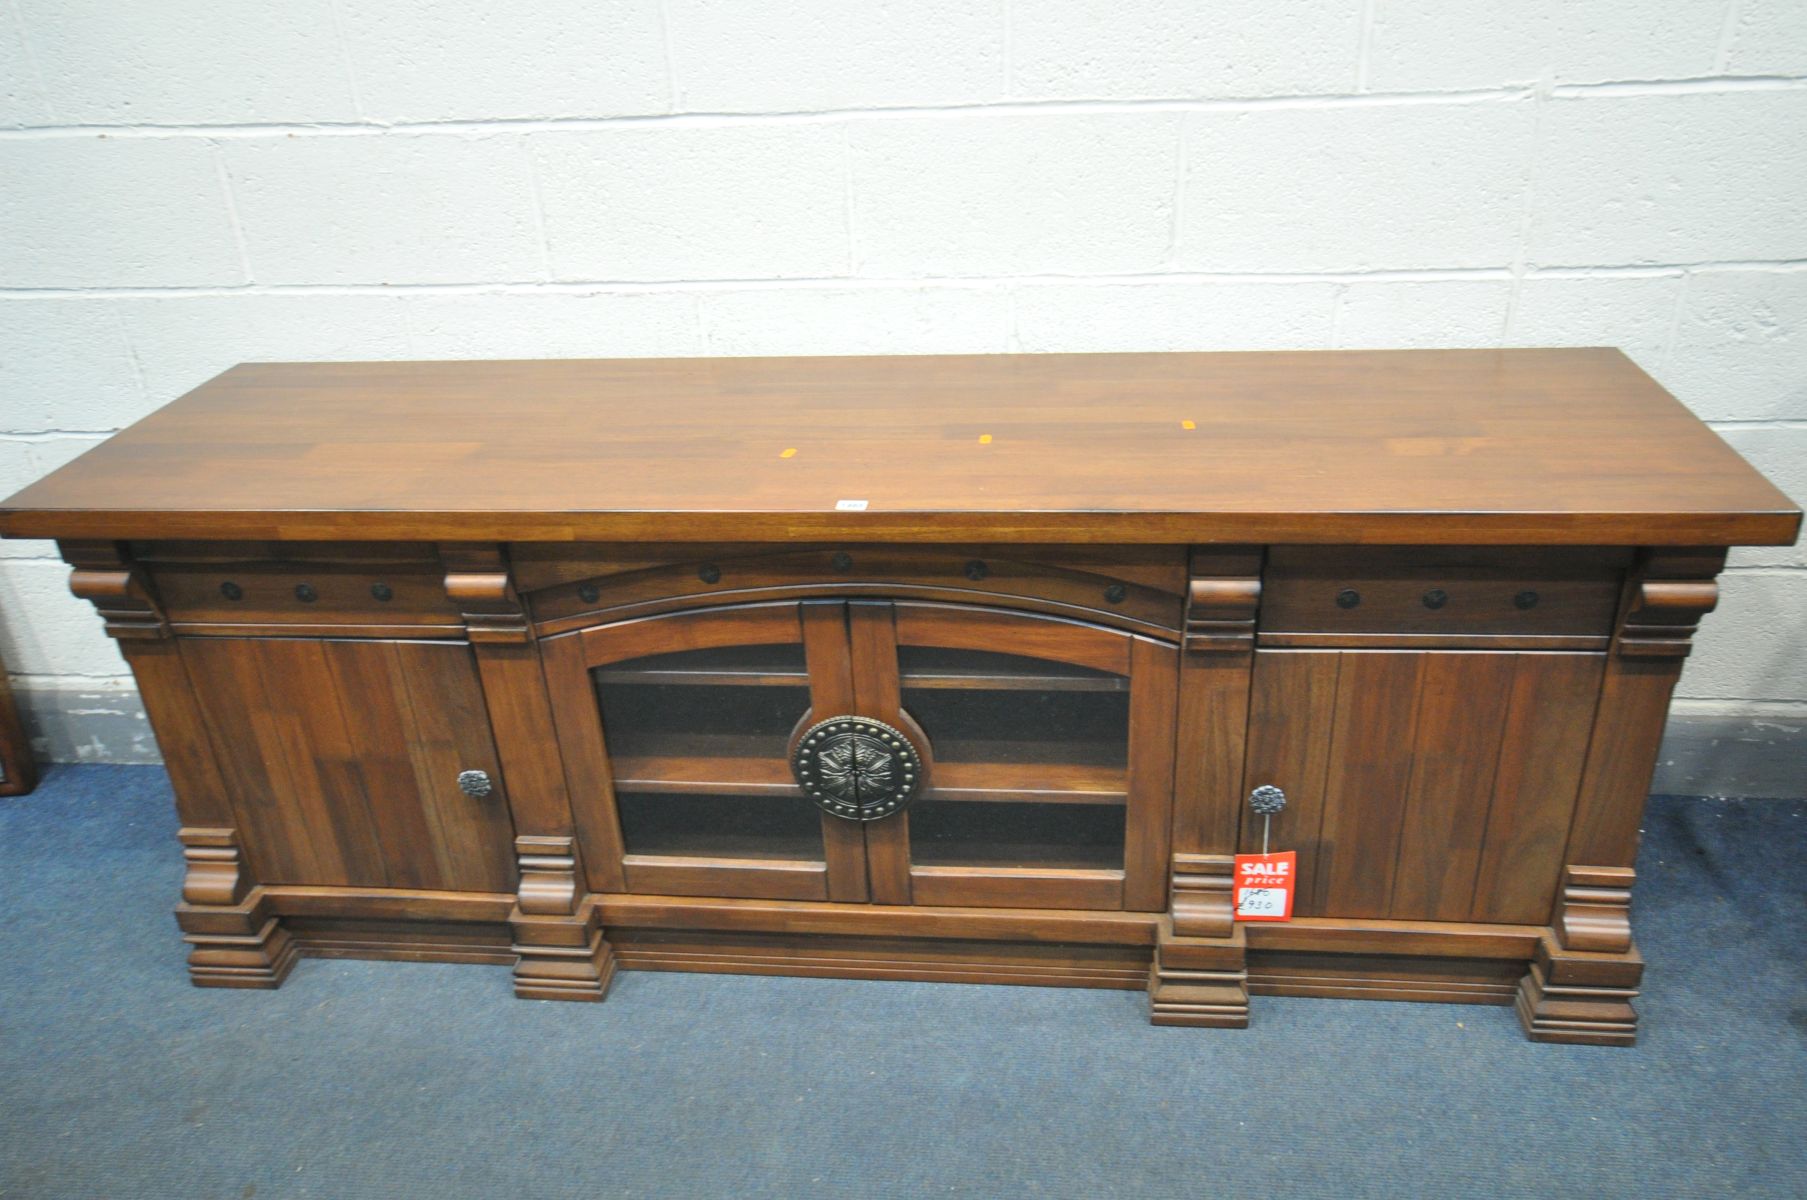 A HEAVY CHERRYWOOD SIDEBOARD, with drawers, and cupboard doors, width 199cm x depth 55cm x height